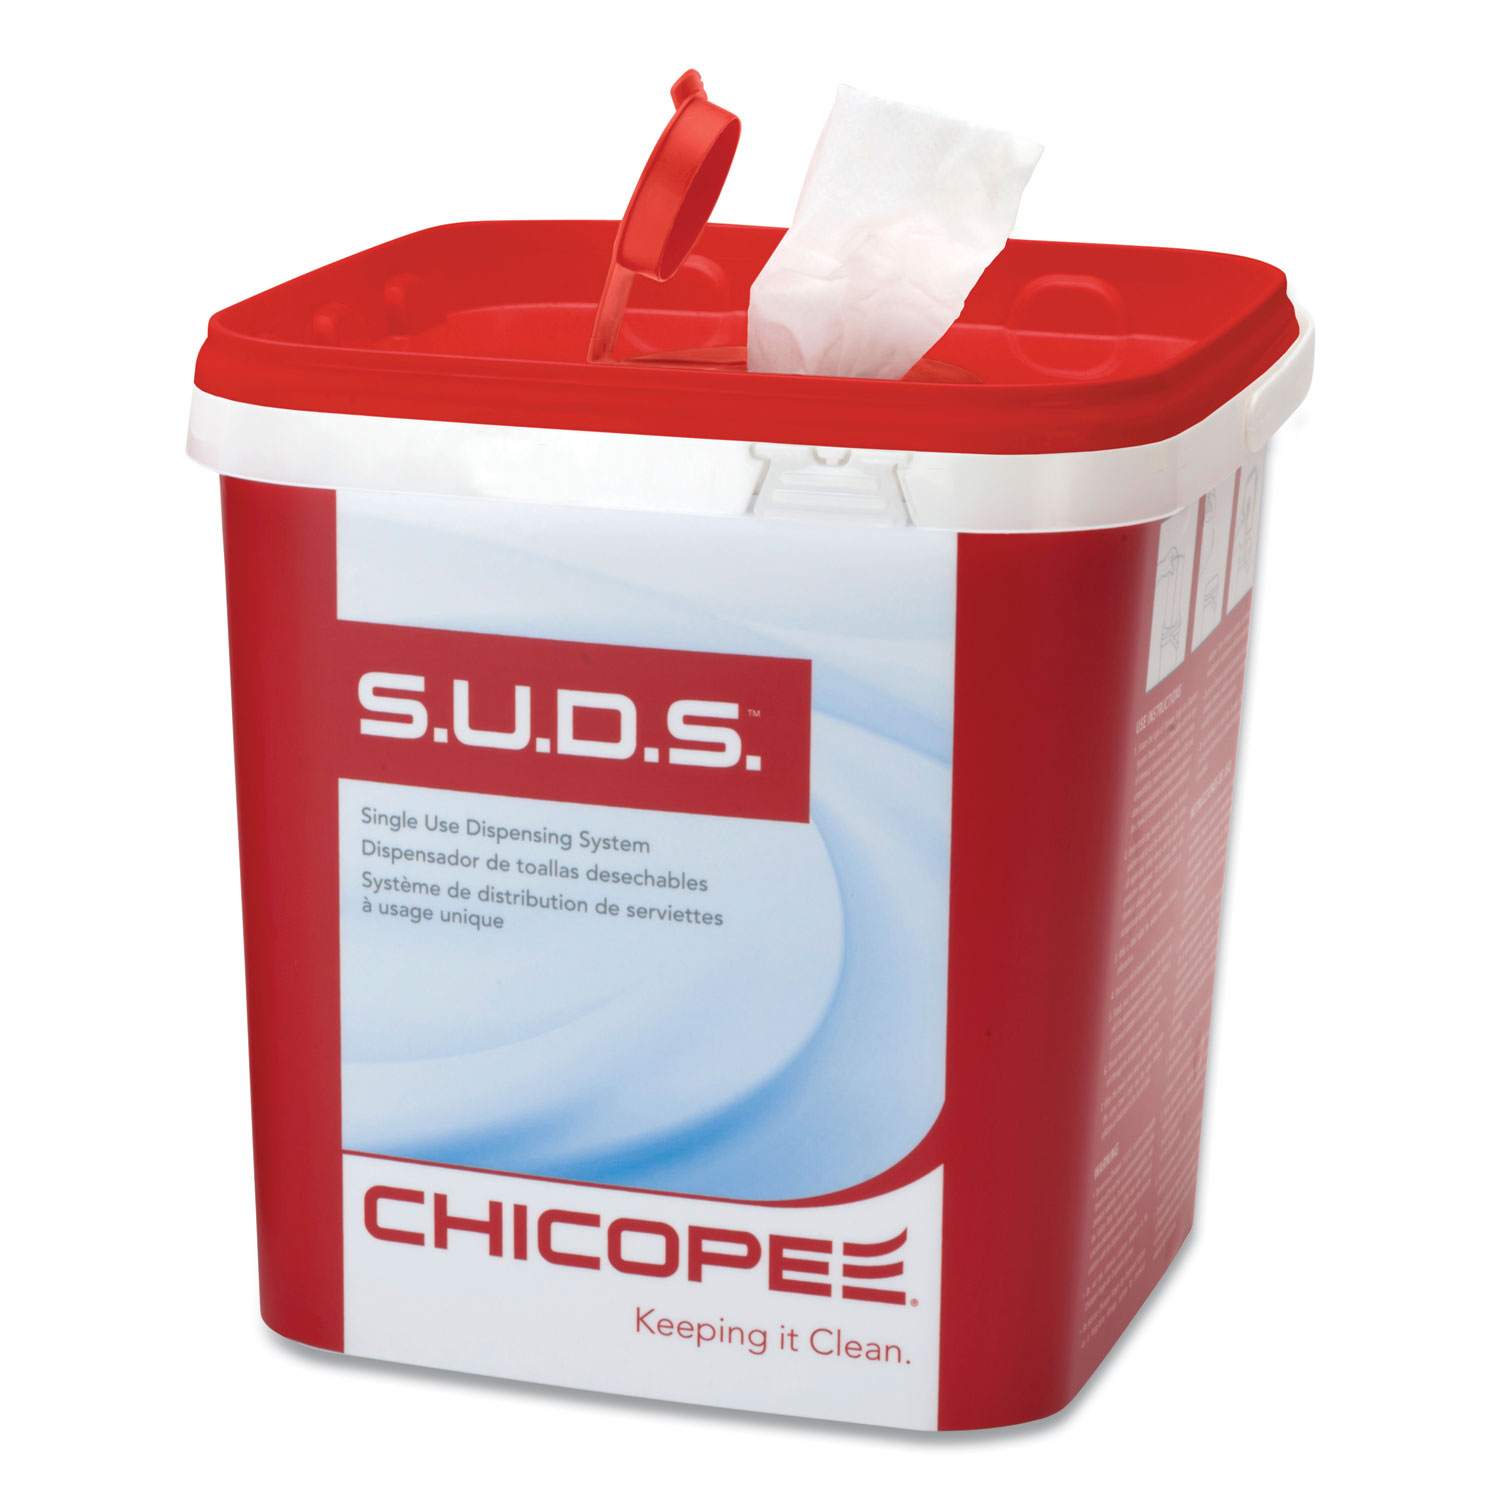  Chicopee 0728 S.U.D.S Bucket with Lid, 7.5 x 7.5 x 8, Red/White, 3/Carton (CHI0728) 